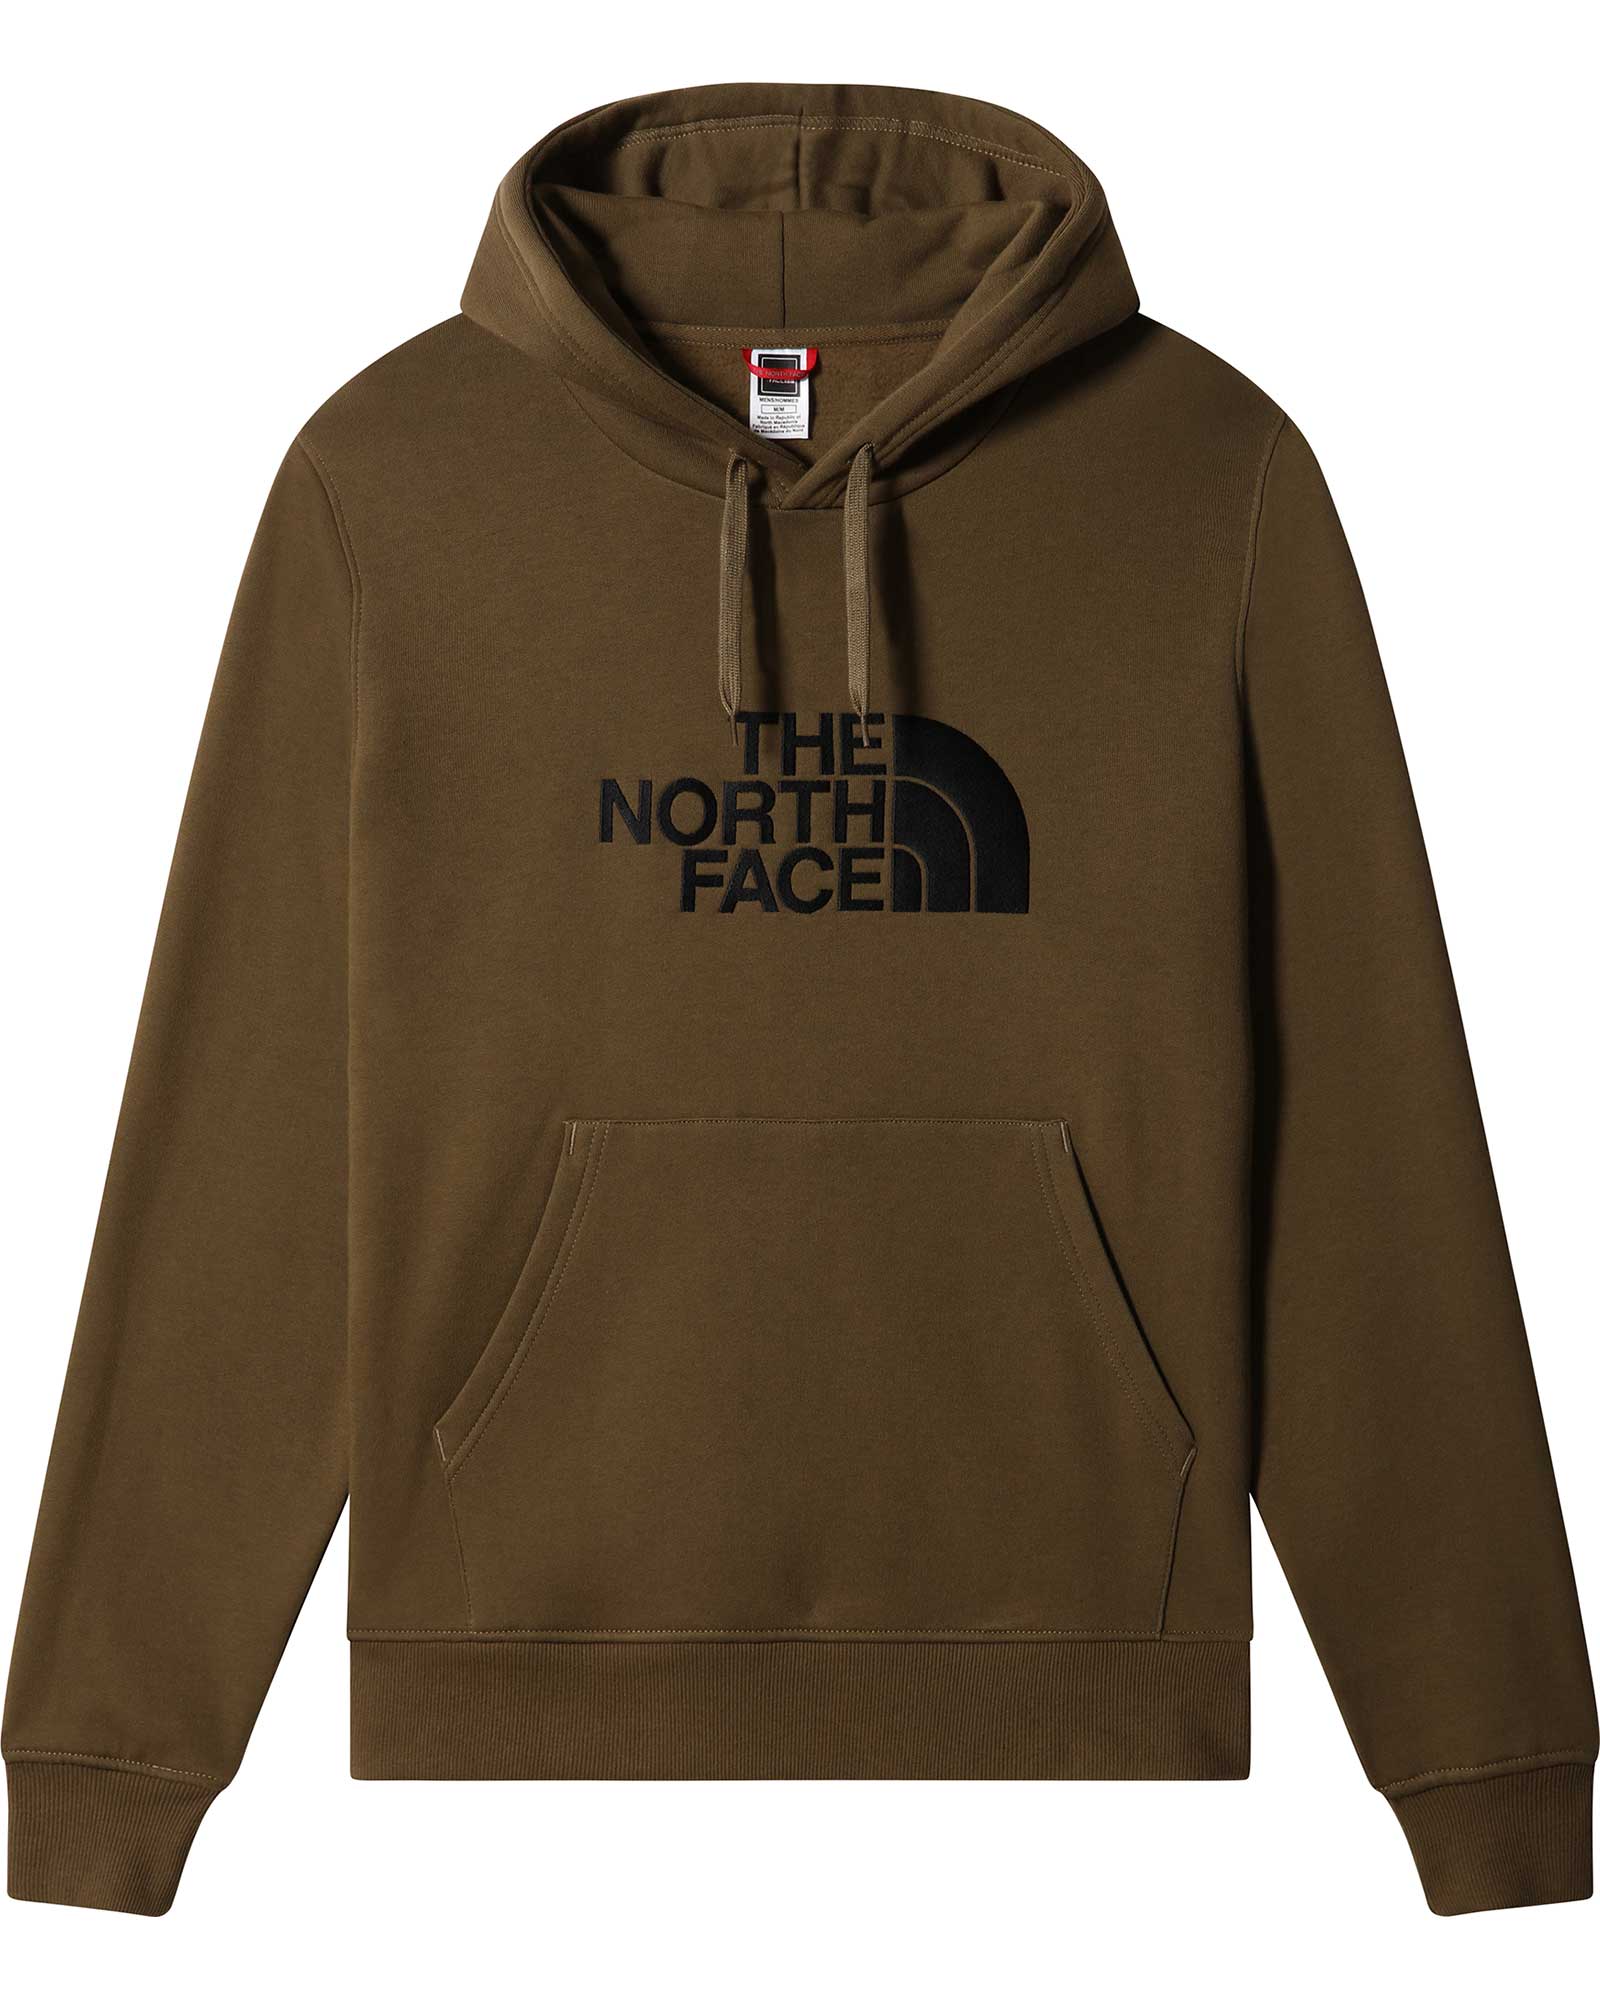 Product image of The North Face Drew Peak Pullover Men's Hoodie